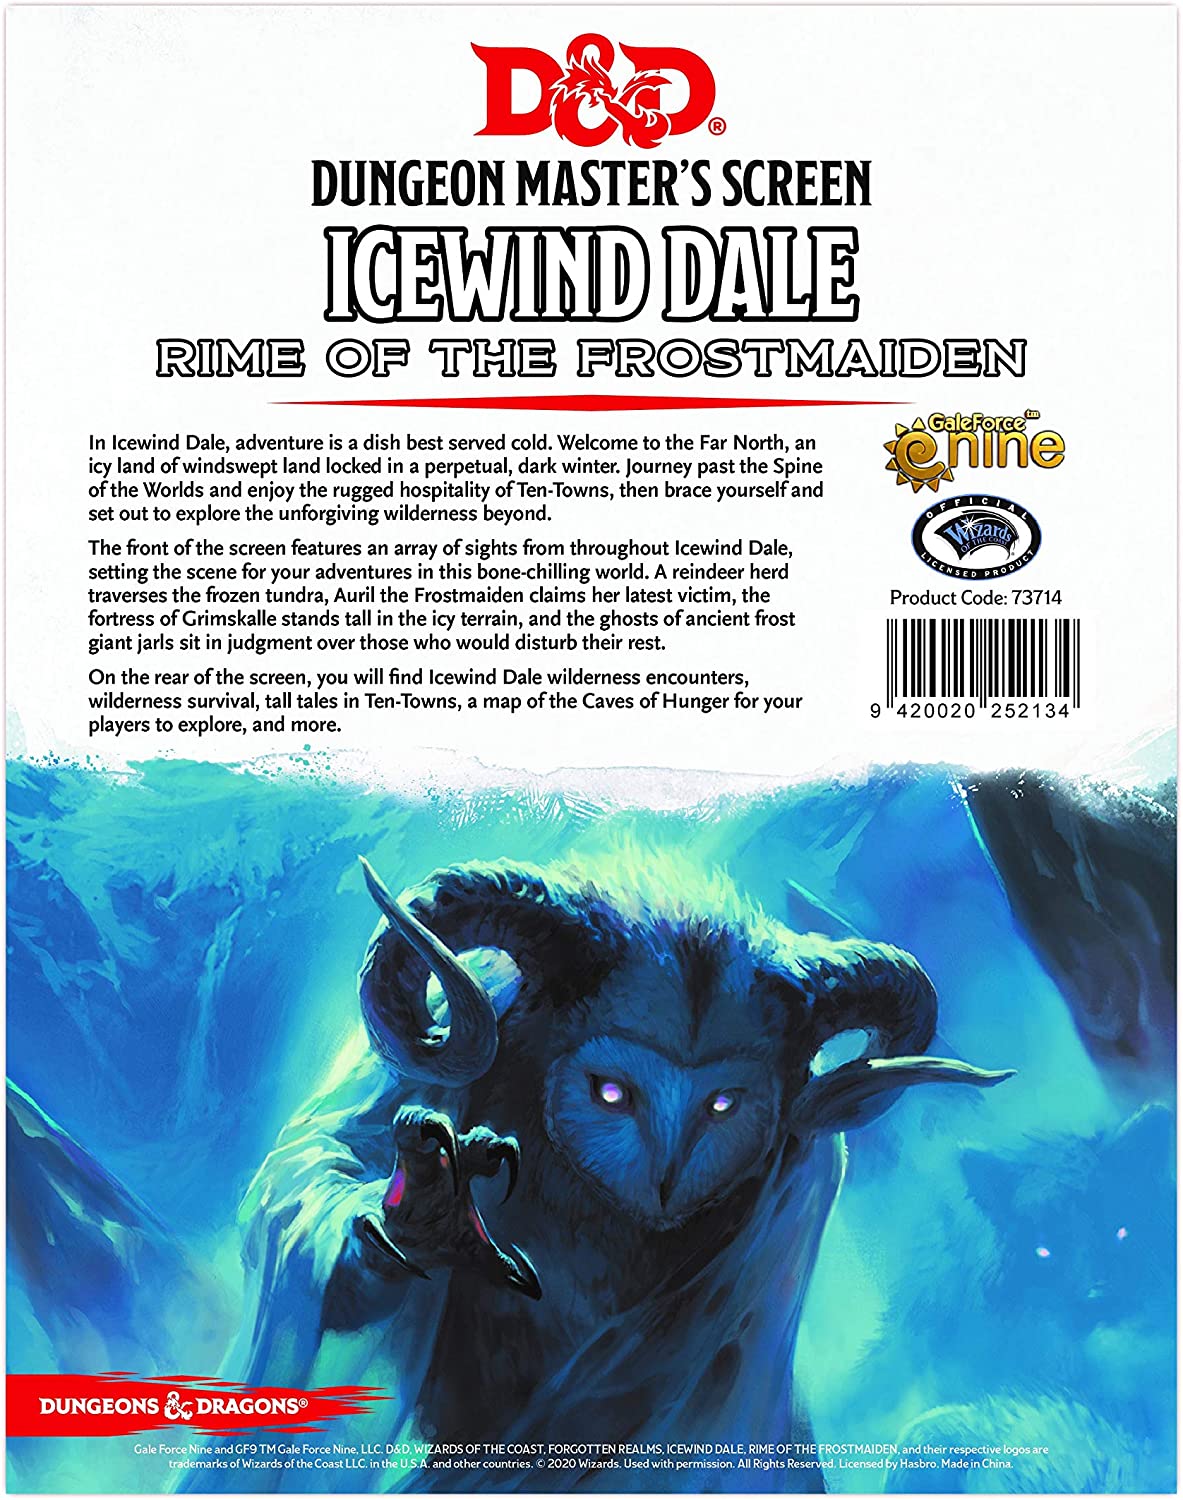 Dungeon Masters Screen: Icewind Dale - Rime of The Frostmaiden (73714)